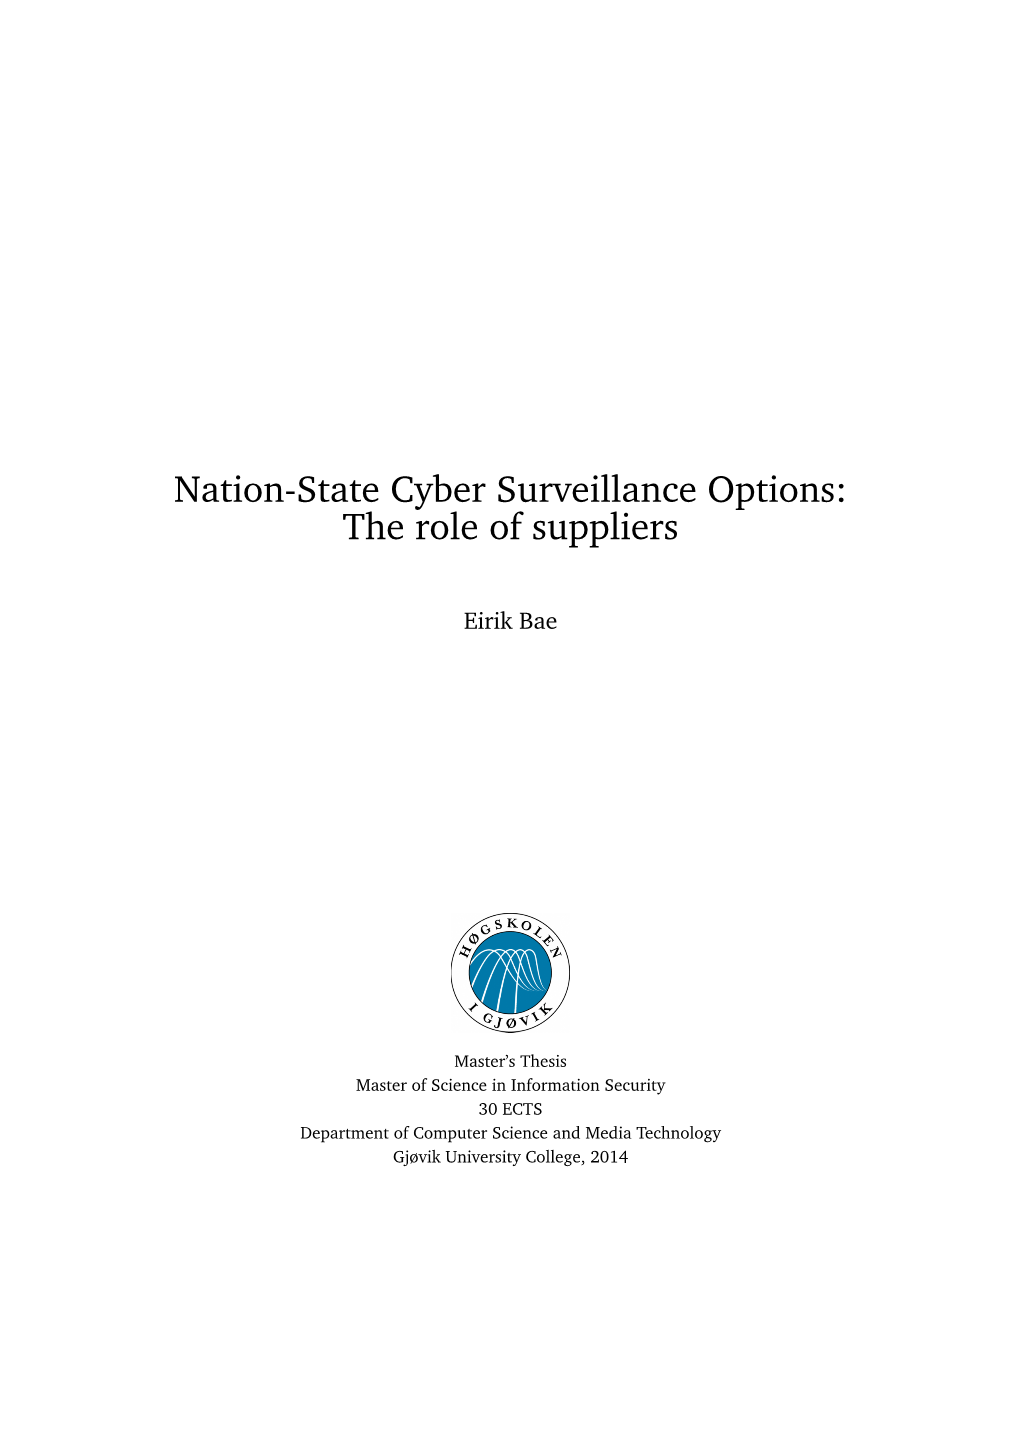 Nation-State Cyber Surveillance Options: the Role of Suppliers